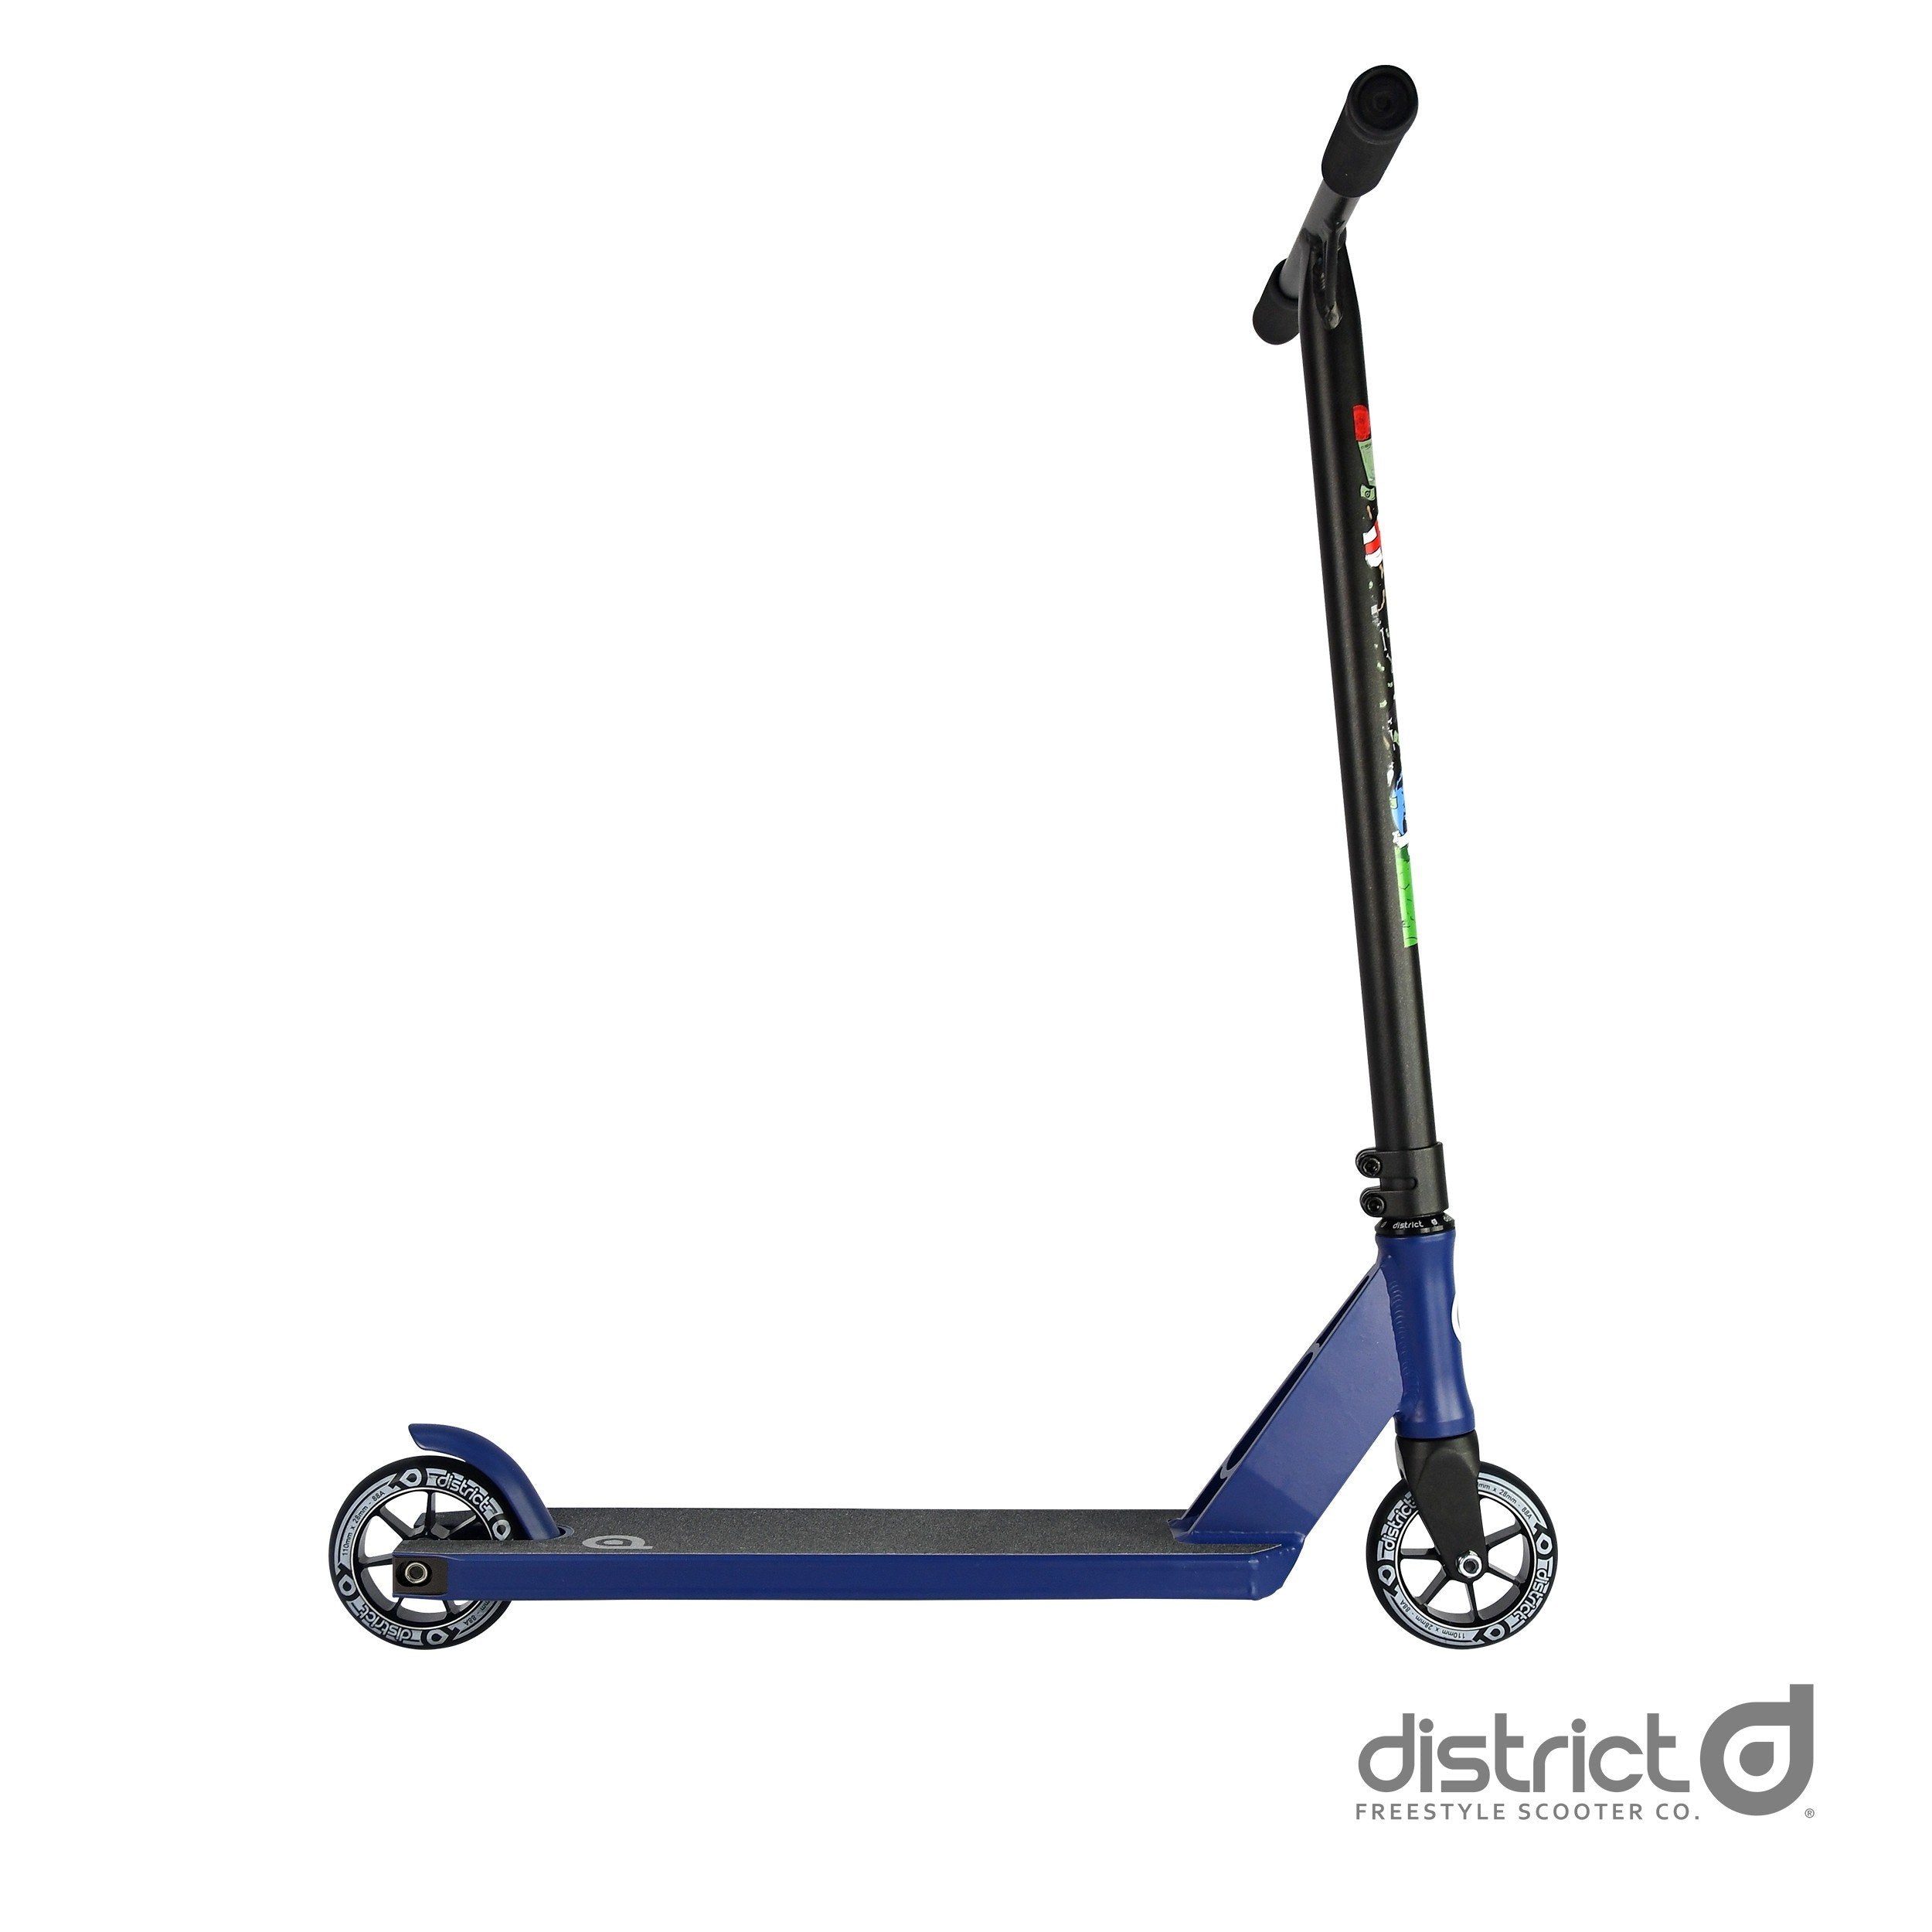 District C50 Lewis Crampton - Scooter Complete Side View